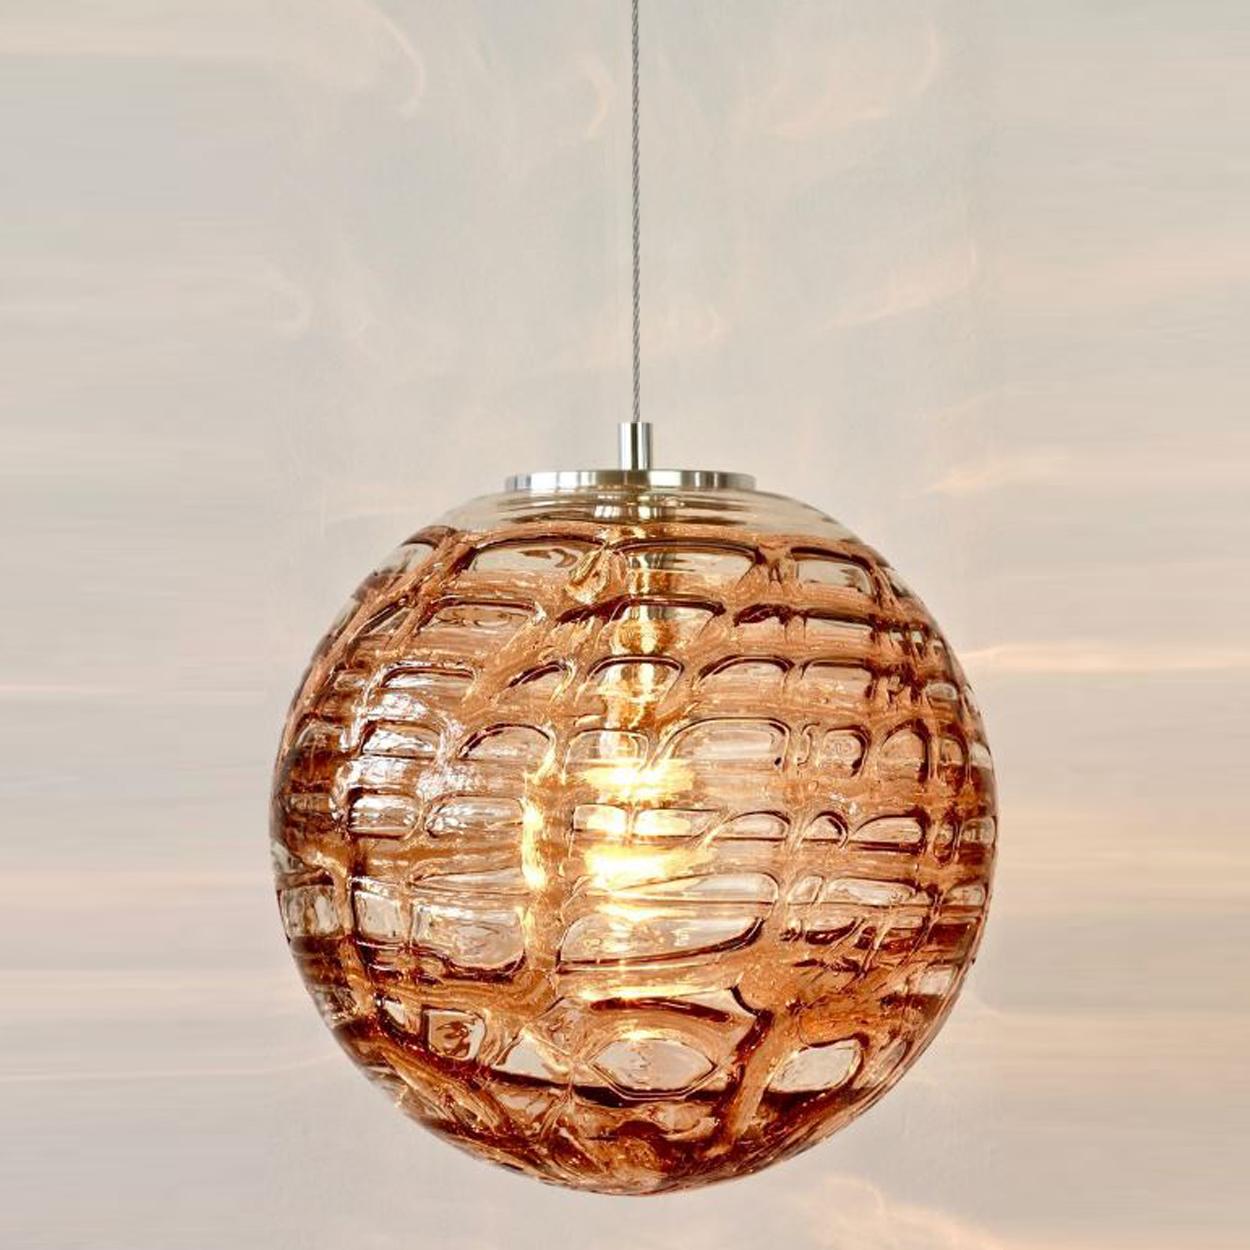 Pair of high-end Murano pendant lights in the style of Venini, manufactured, circa 1960. Real statement pieces. Heavy quality thick Murano crystal glass shade made out of overlay glasses of clear, light pink and dark pink applied in irregular